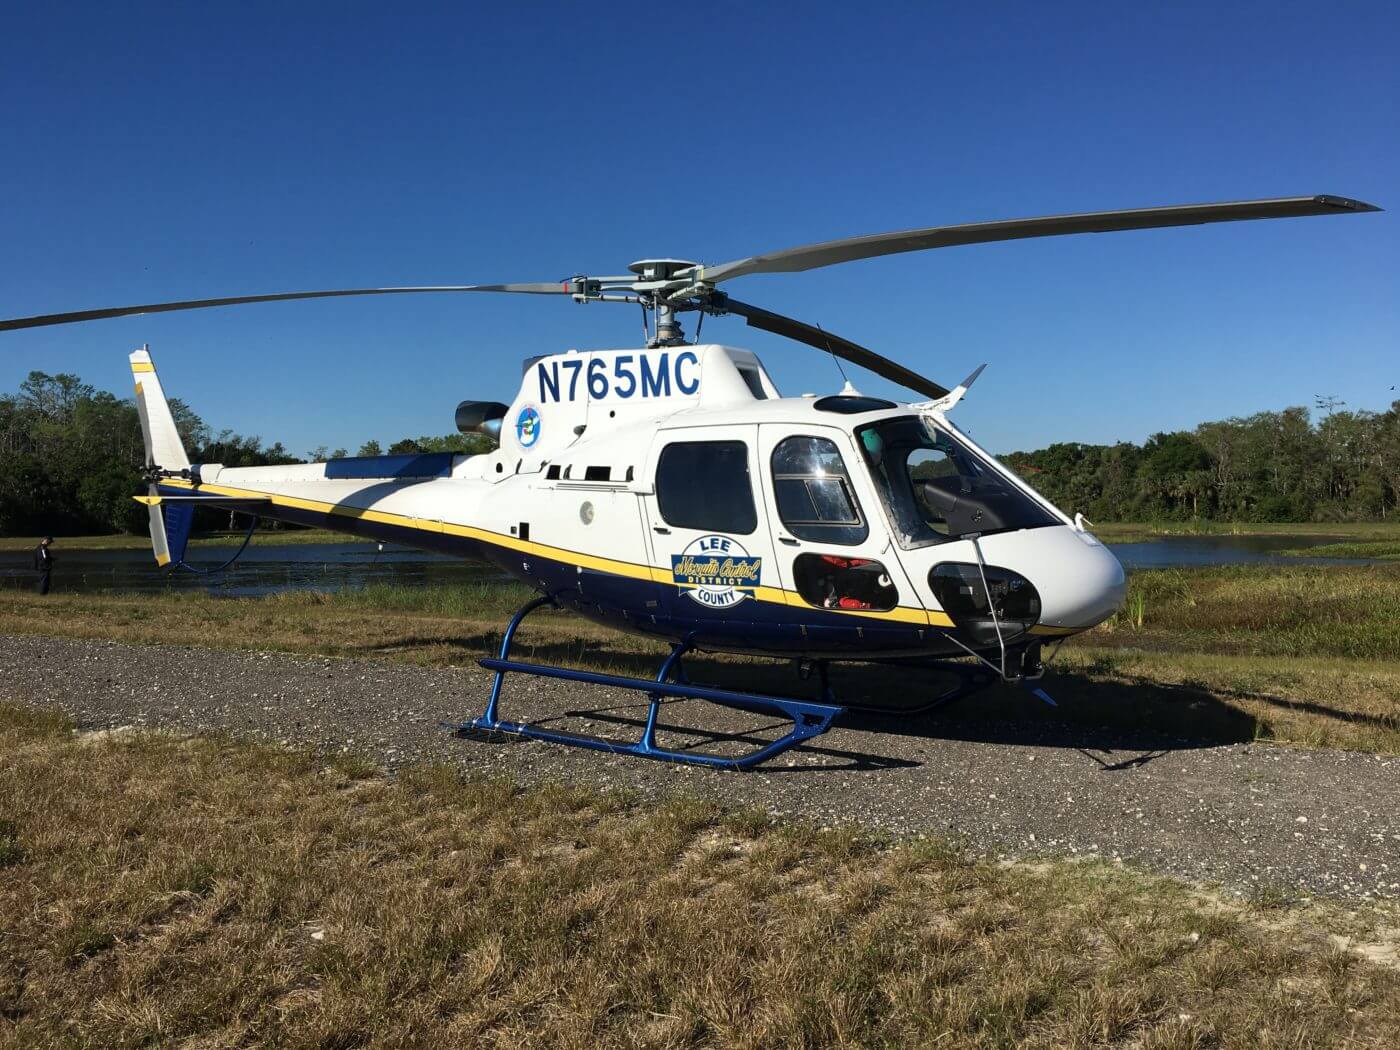 Lee County Mosquito Control District expects to operate each of the H125s 200 to 250 hours a year. Airbus Photo